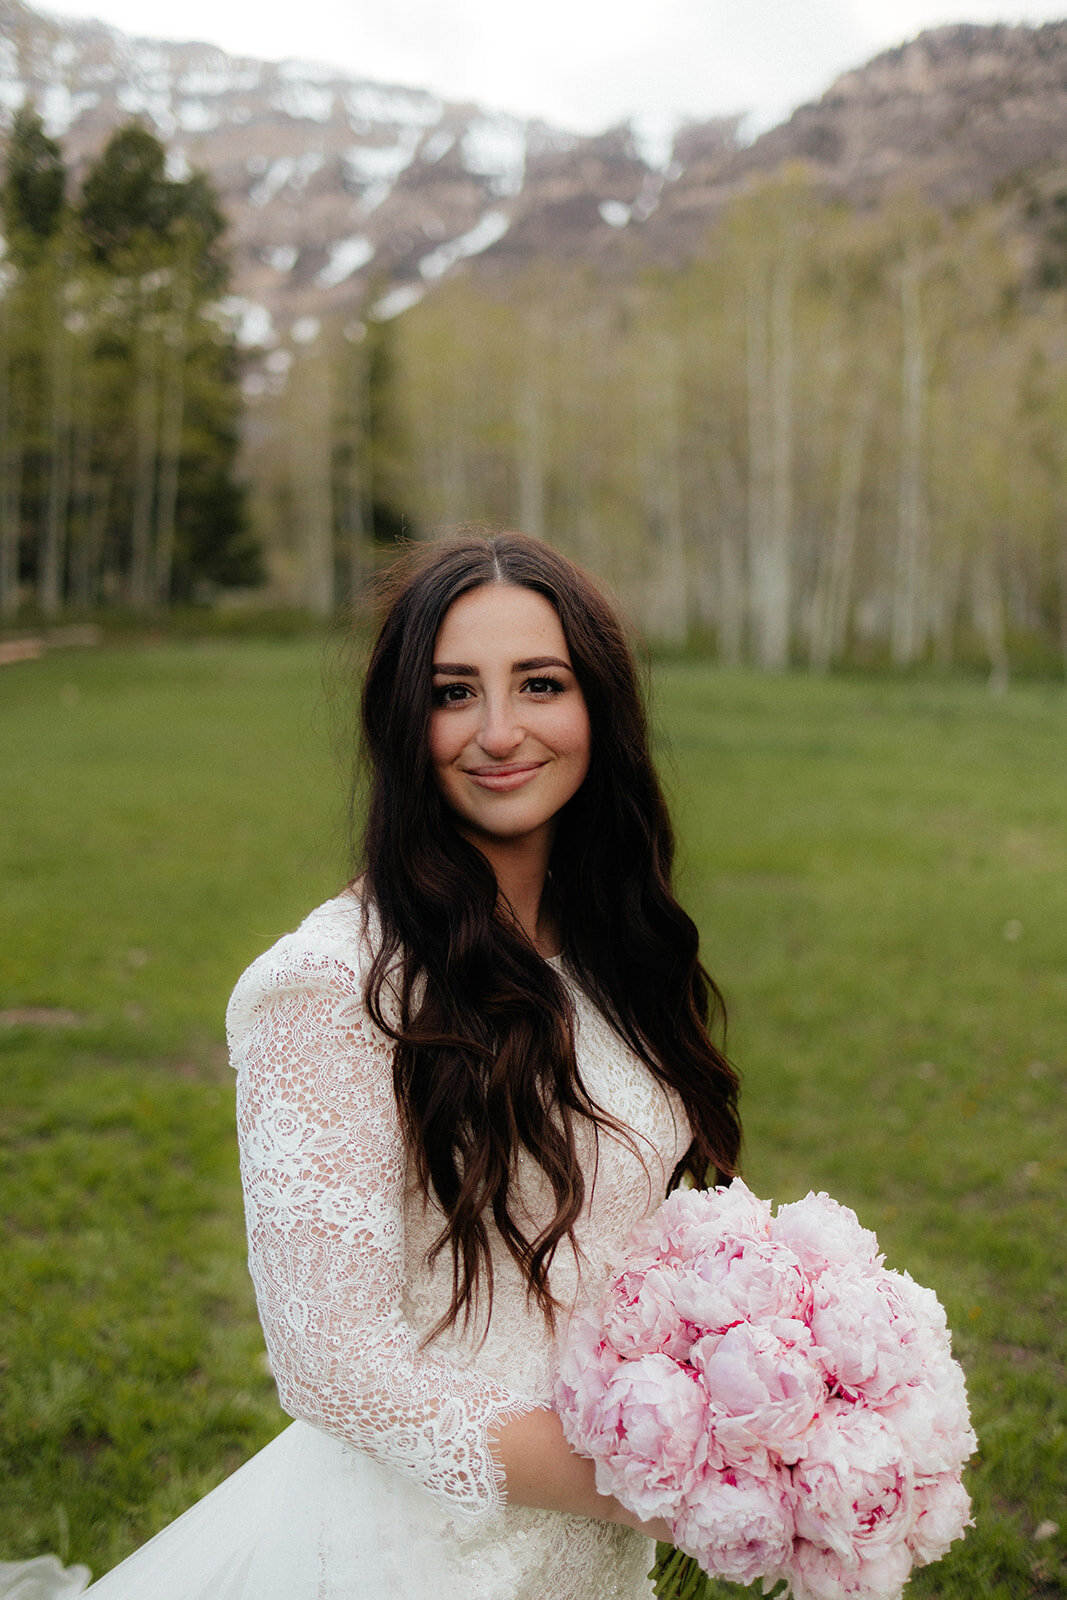 Bridal photography with lace wedding dress and pink peony bouquet.